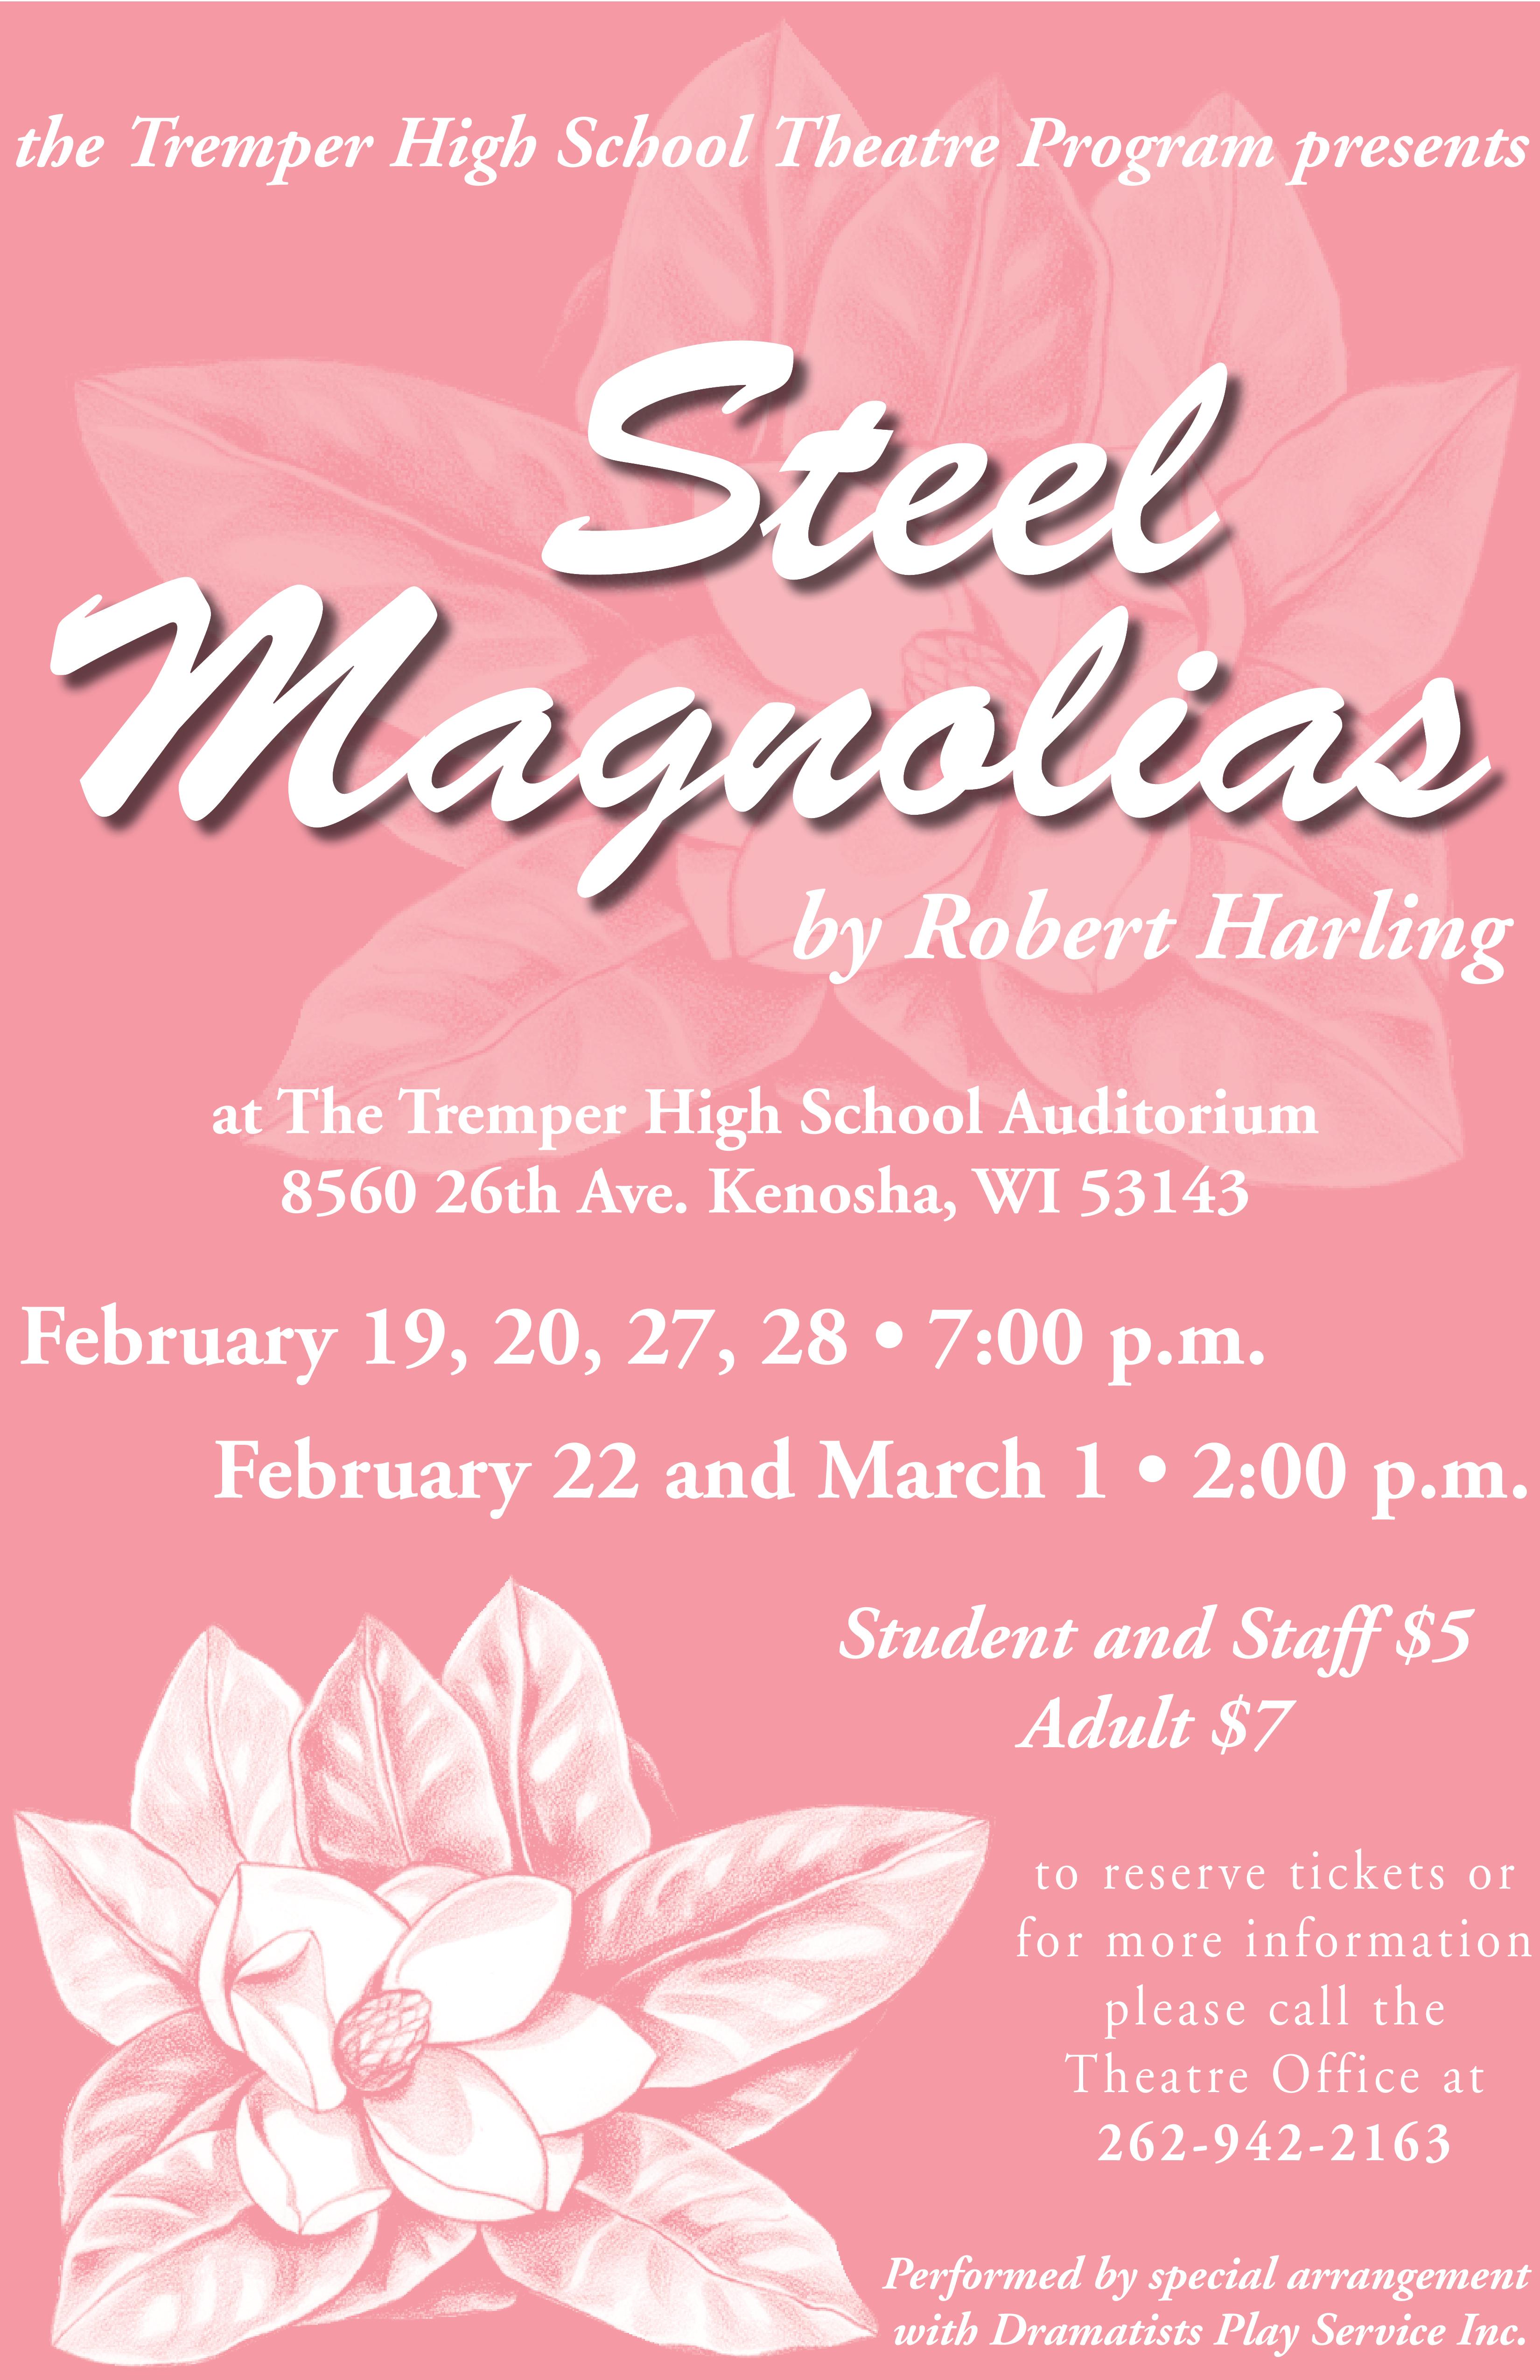 The poster for Steel Magnolias